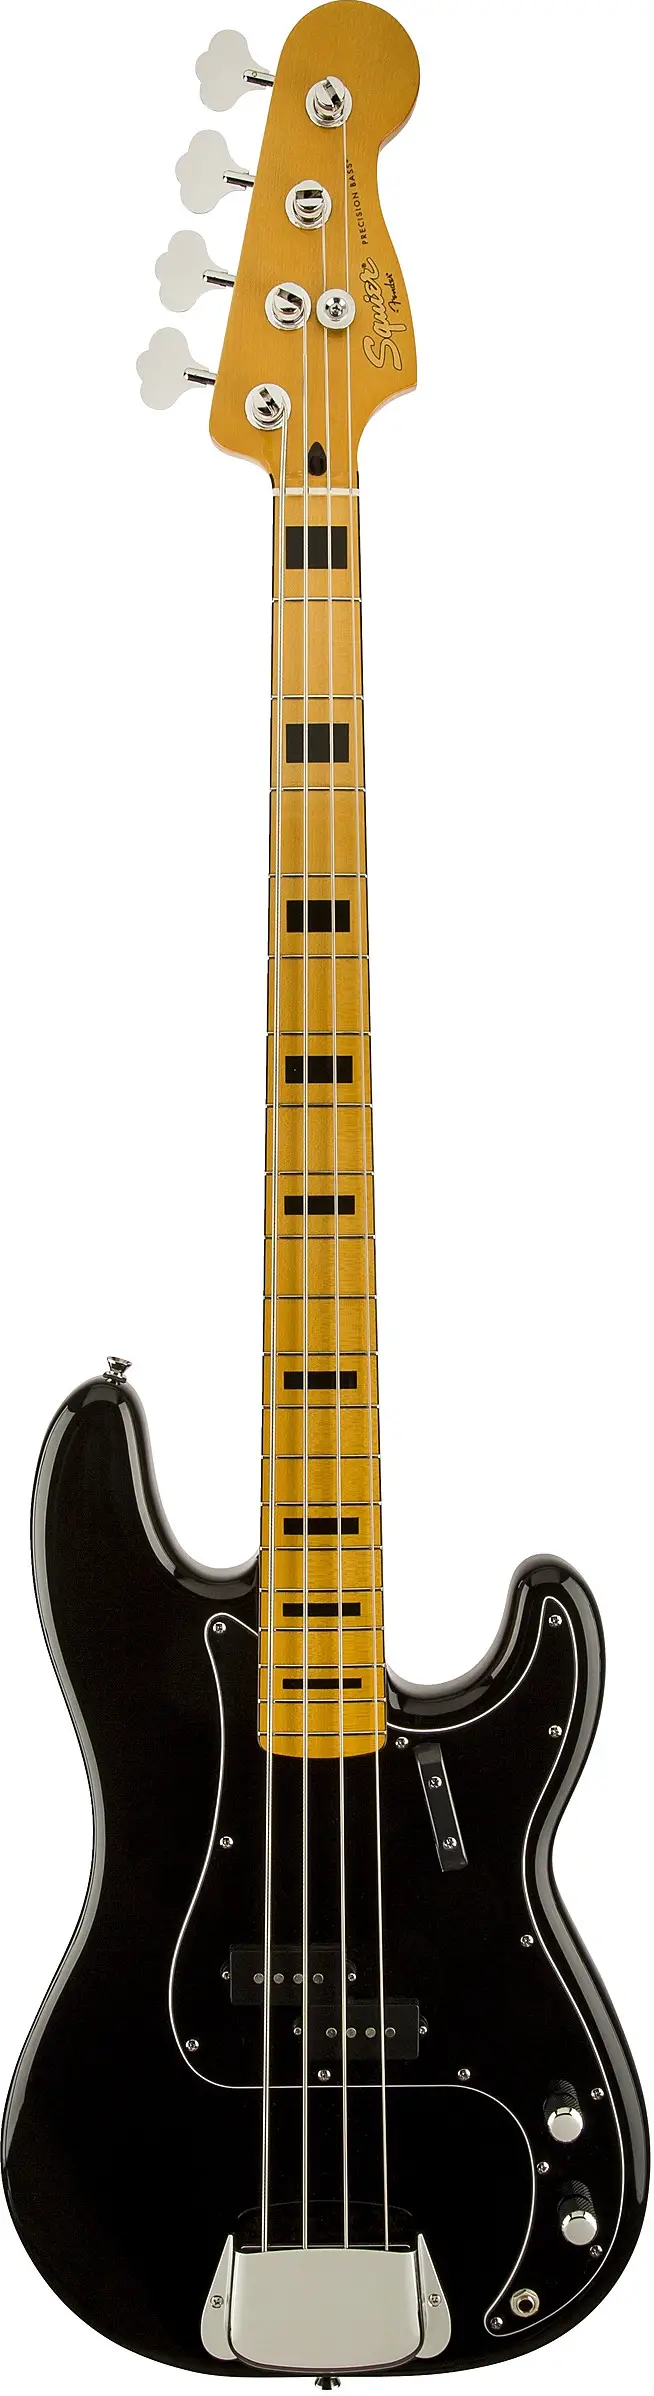 Classic Vibe Precision Bass `70s by Squier by Fender